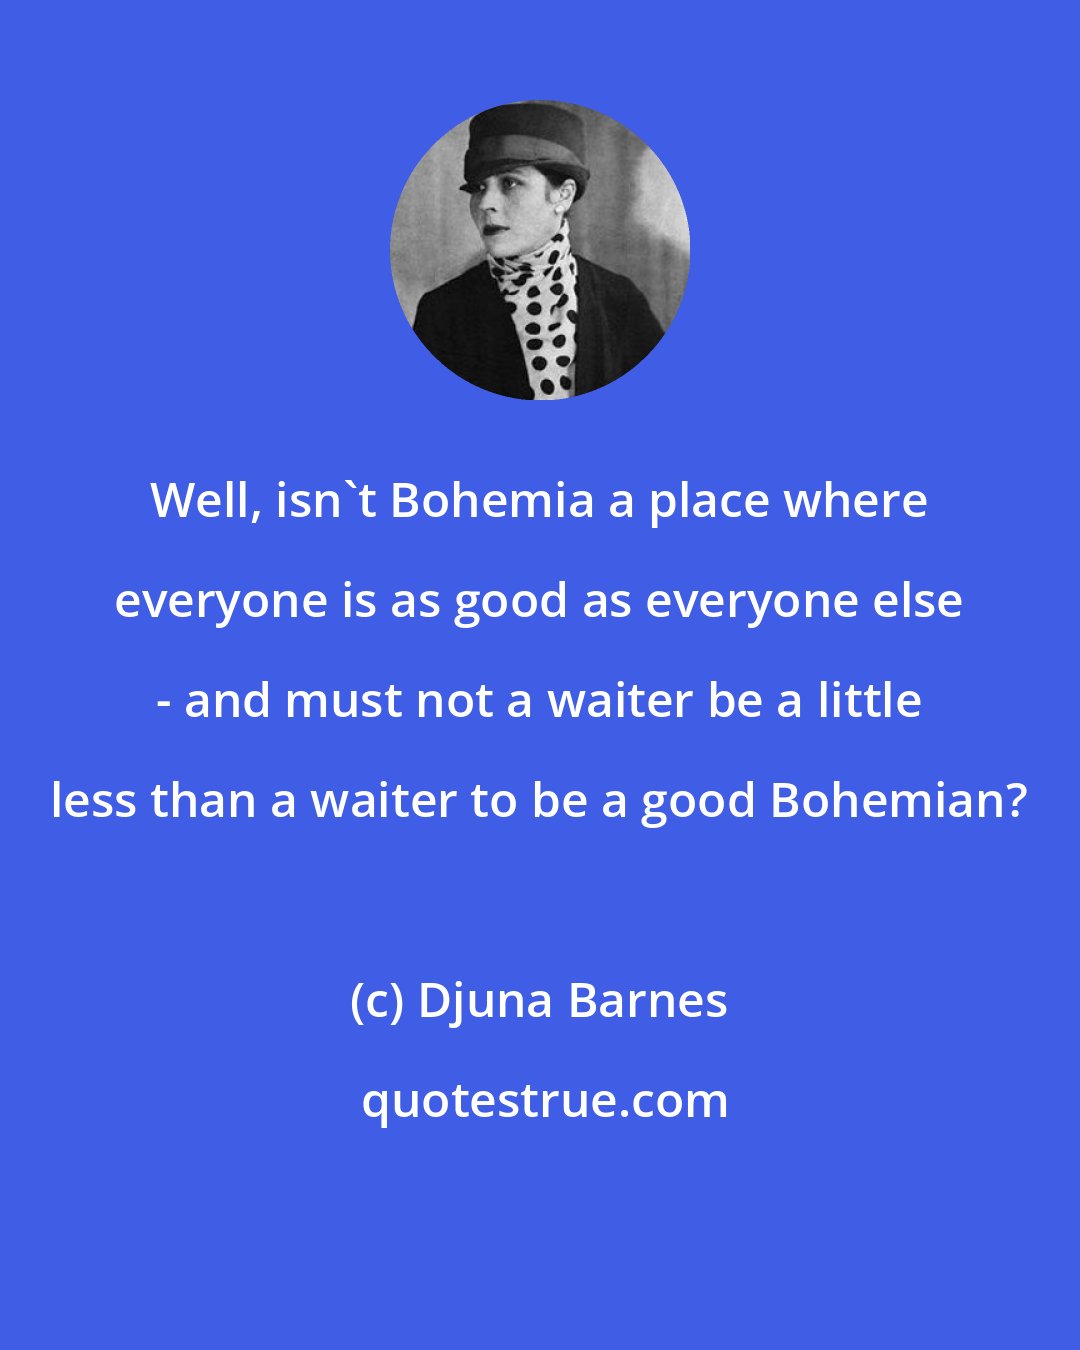 Djuna Barnes: Well, isn't Bohemia a place where everyone is as good as everyone else - and must not a waiter be a little less than a waiter to be a good Bohemian?